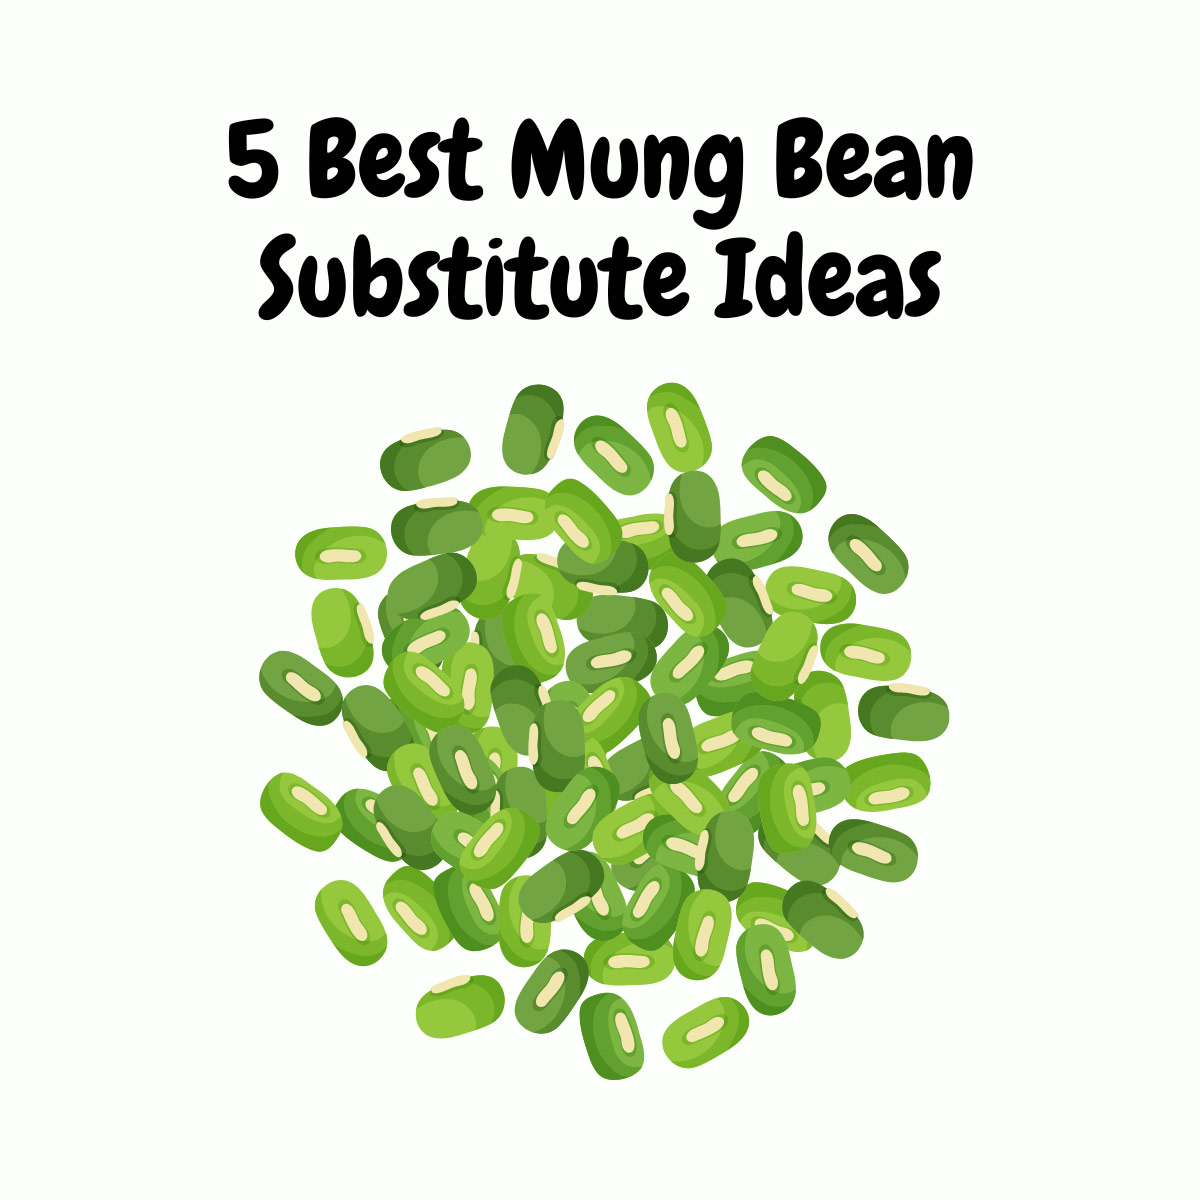 5 Best Mung Bean Substitute Ideas featured image | Girl Meets Food